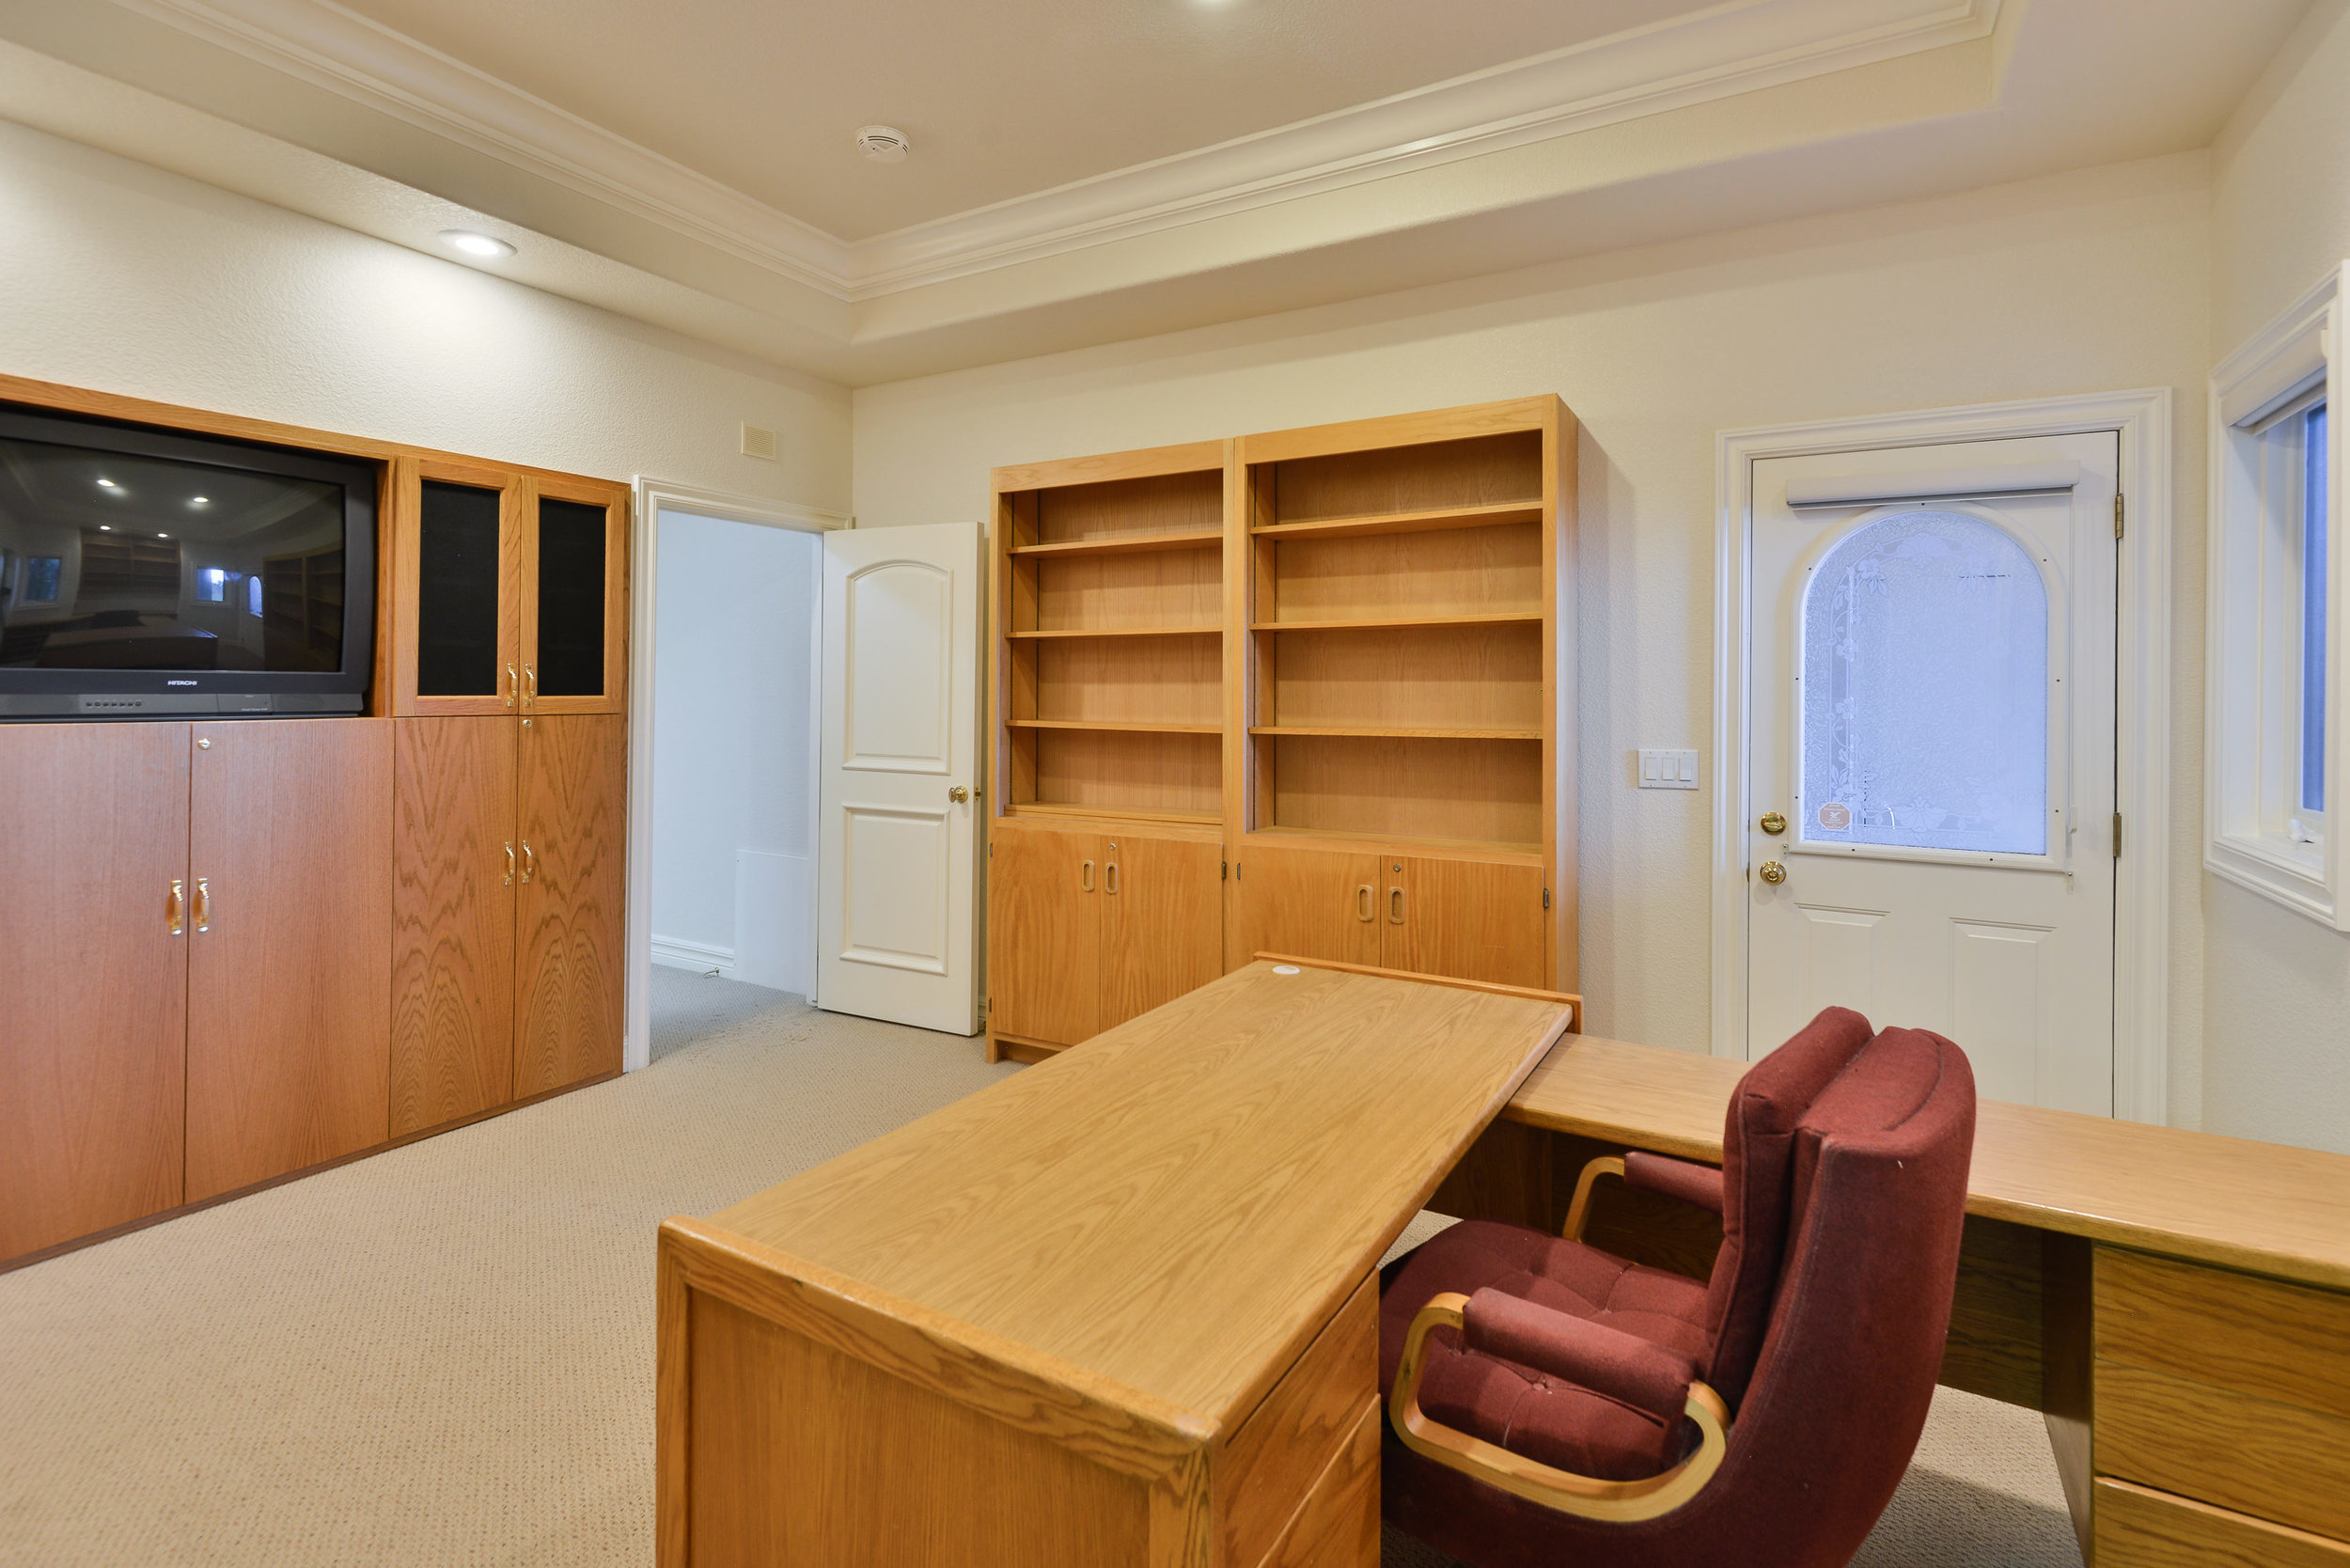 25 - Office with built ins.jpg